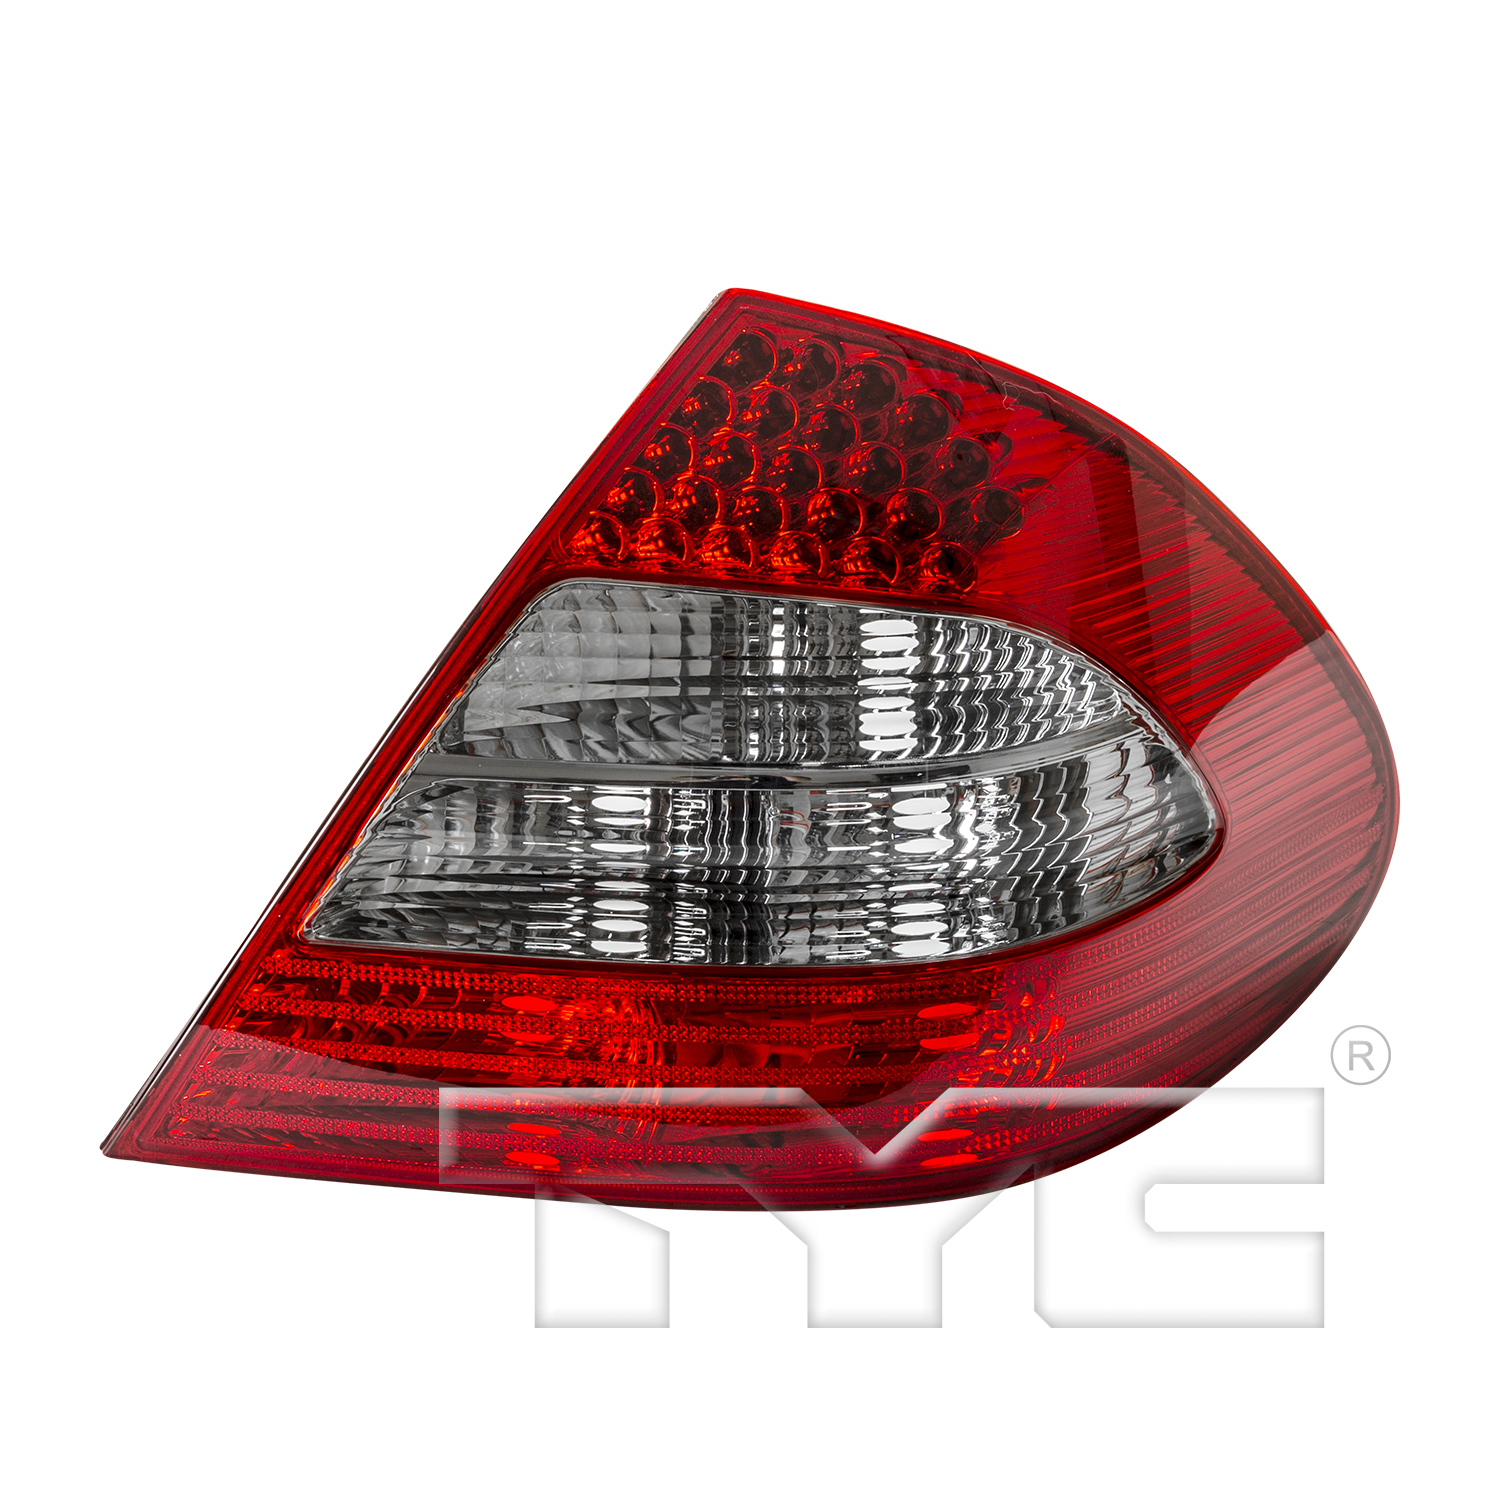 Aftermarket TAILLIGHTS for MERCEDES-BENZ - E63 AMG, E63 AMG,07-09,RT Taillamp assy